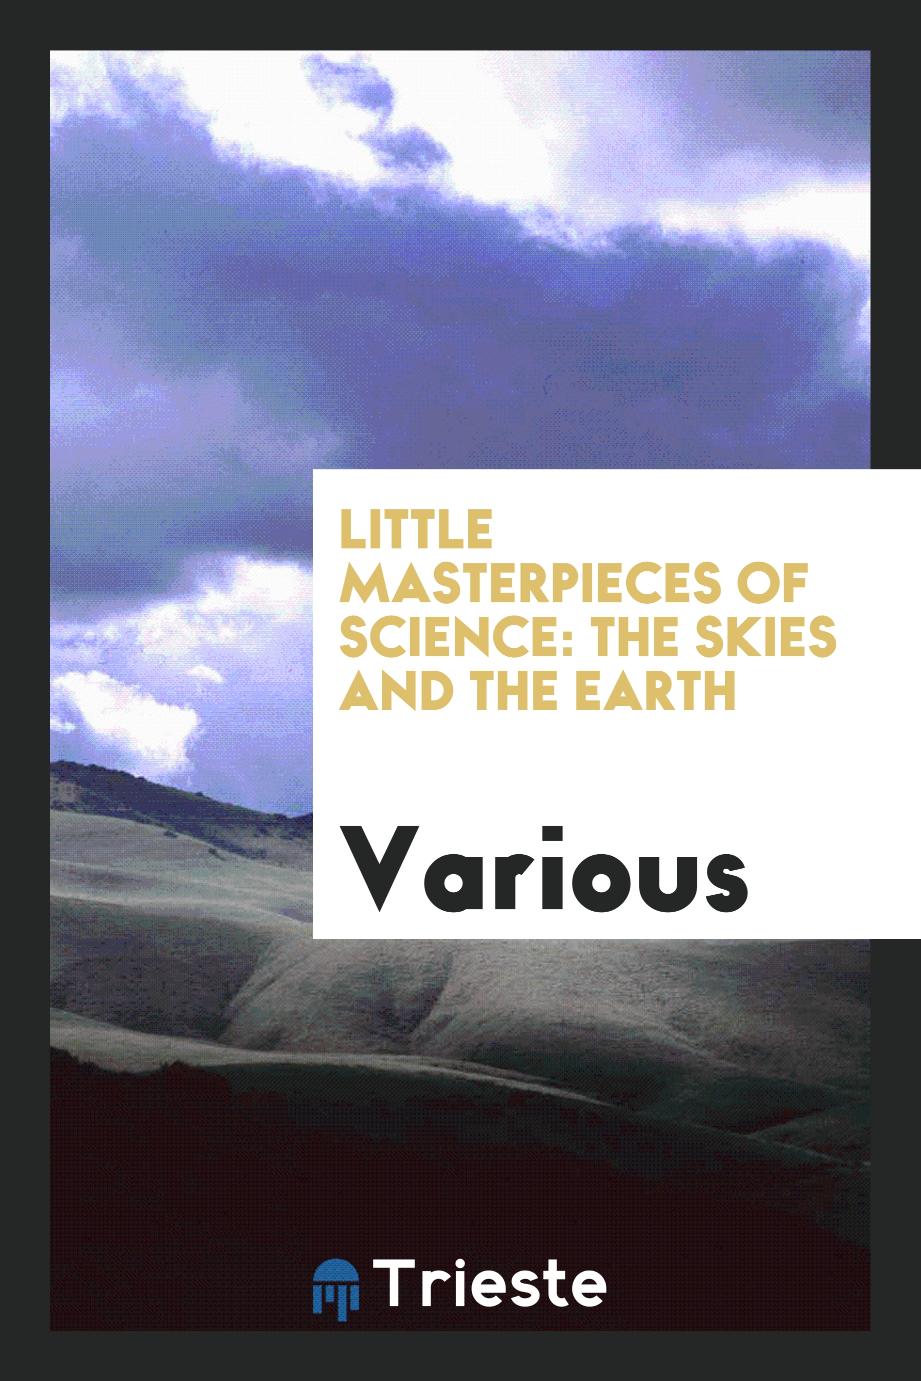 Little Masterpieces of Science: The skies and the earth